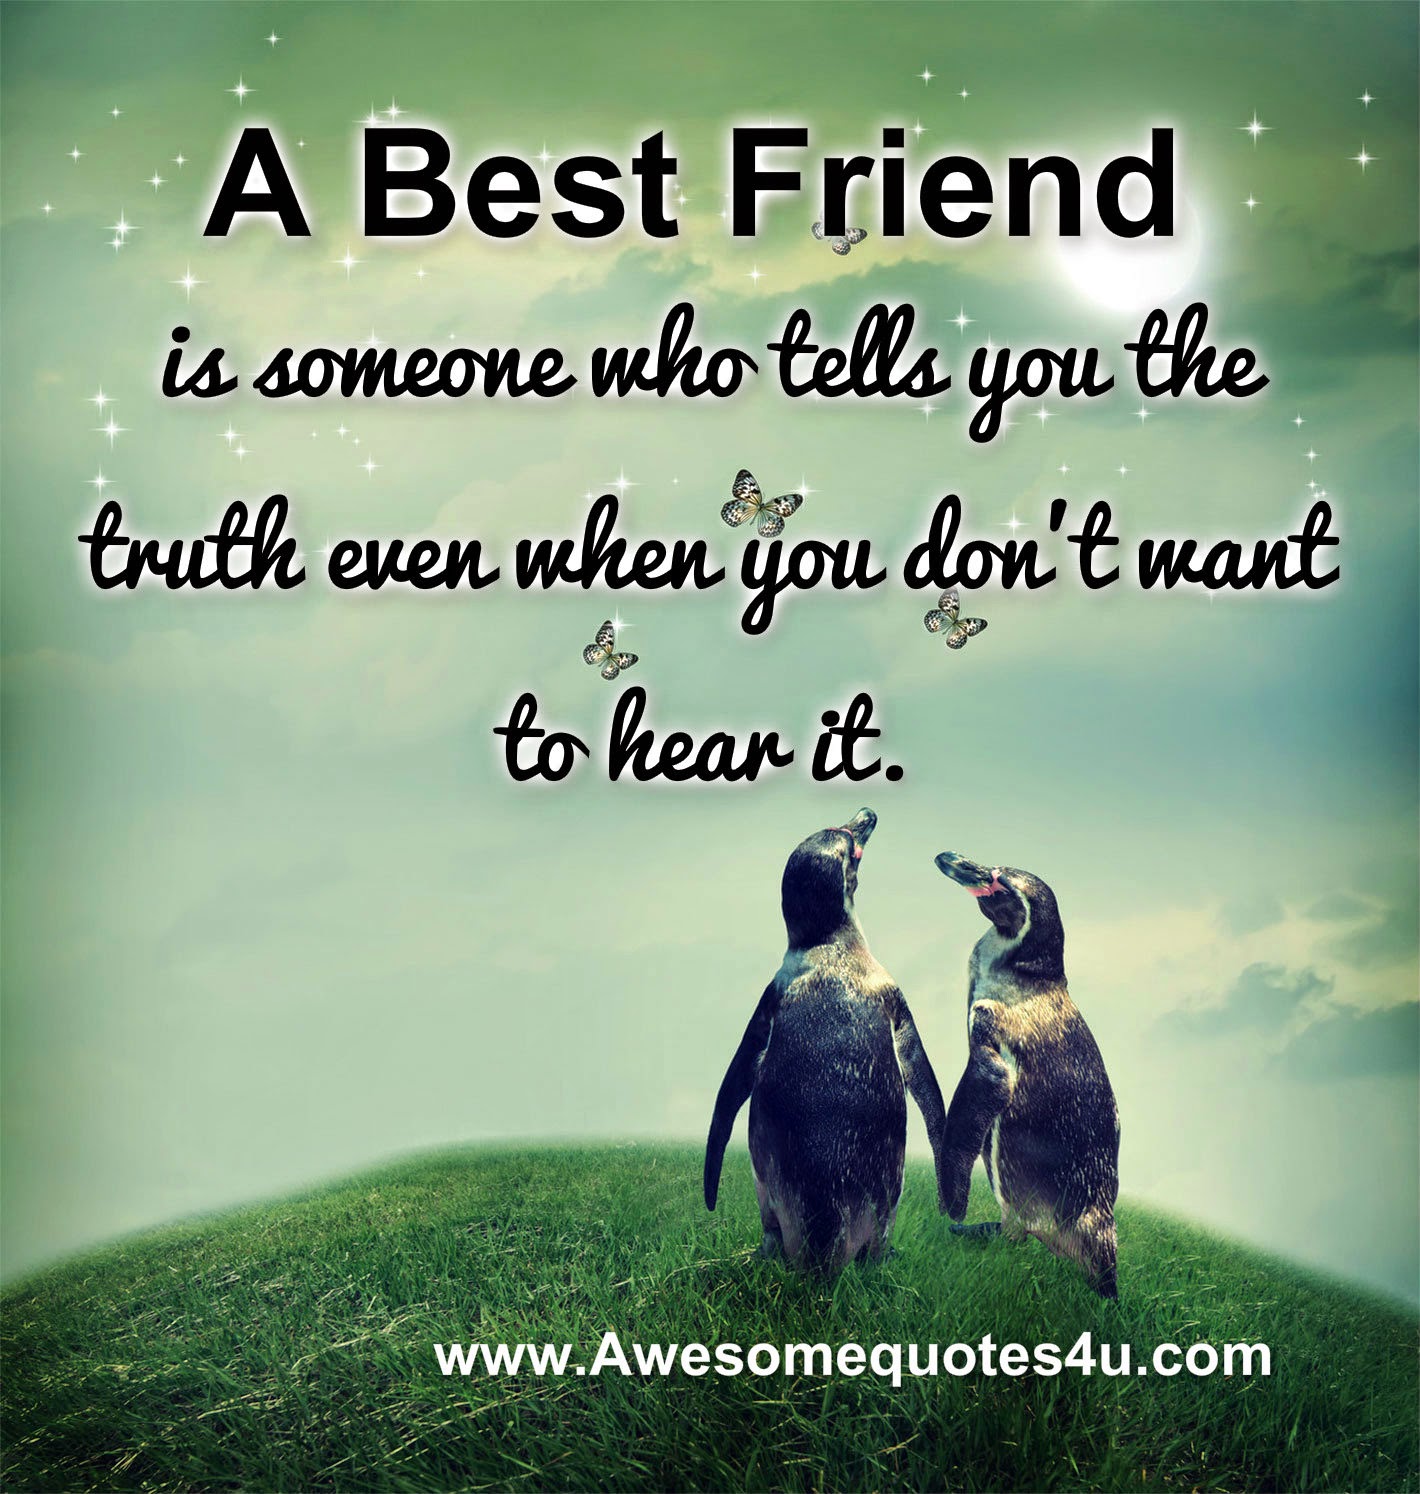 Awesome Quotes: A Heart Touching Story Of Friendship